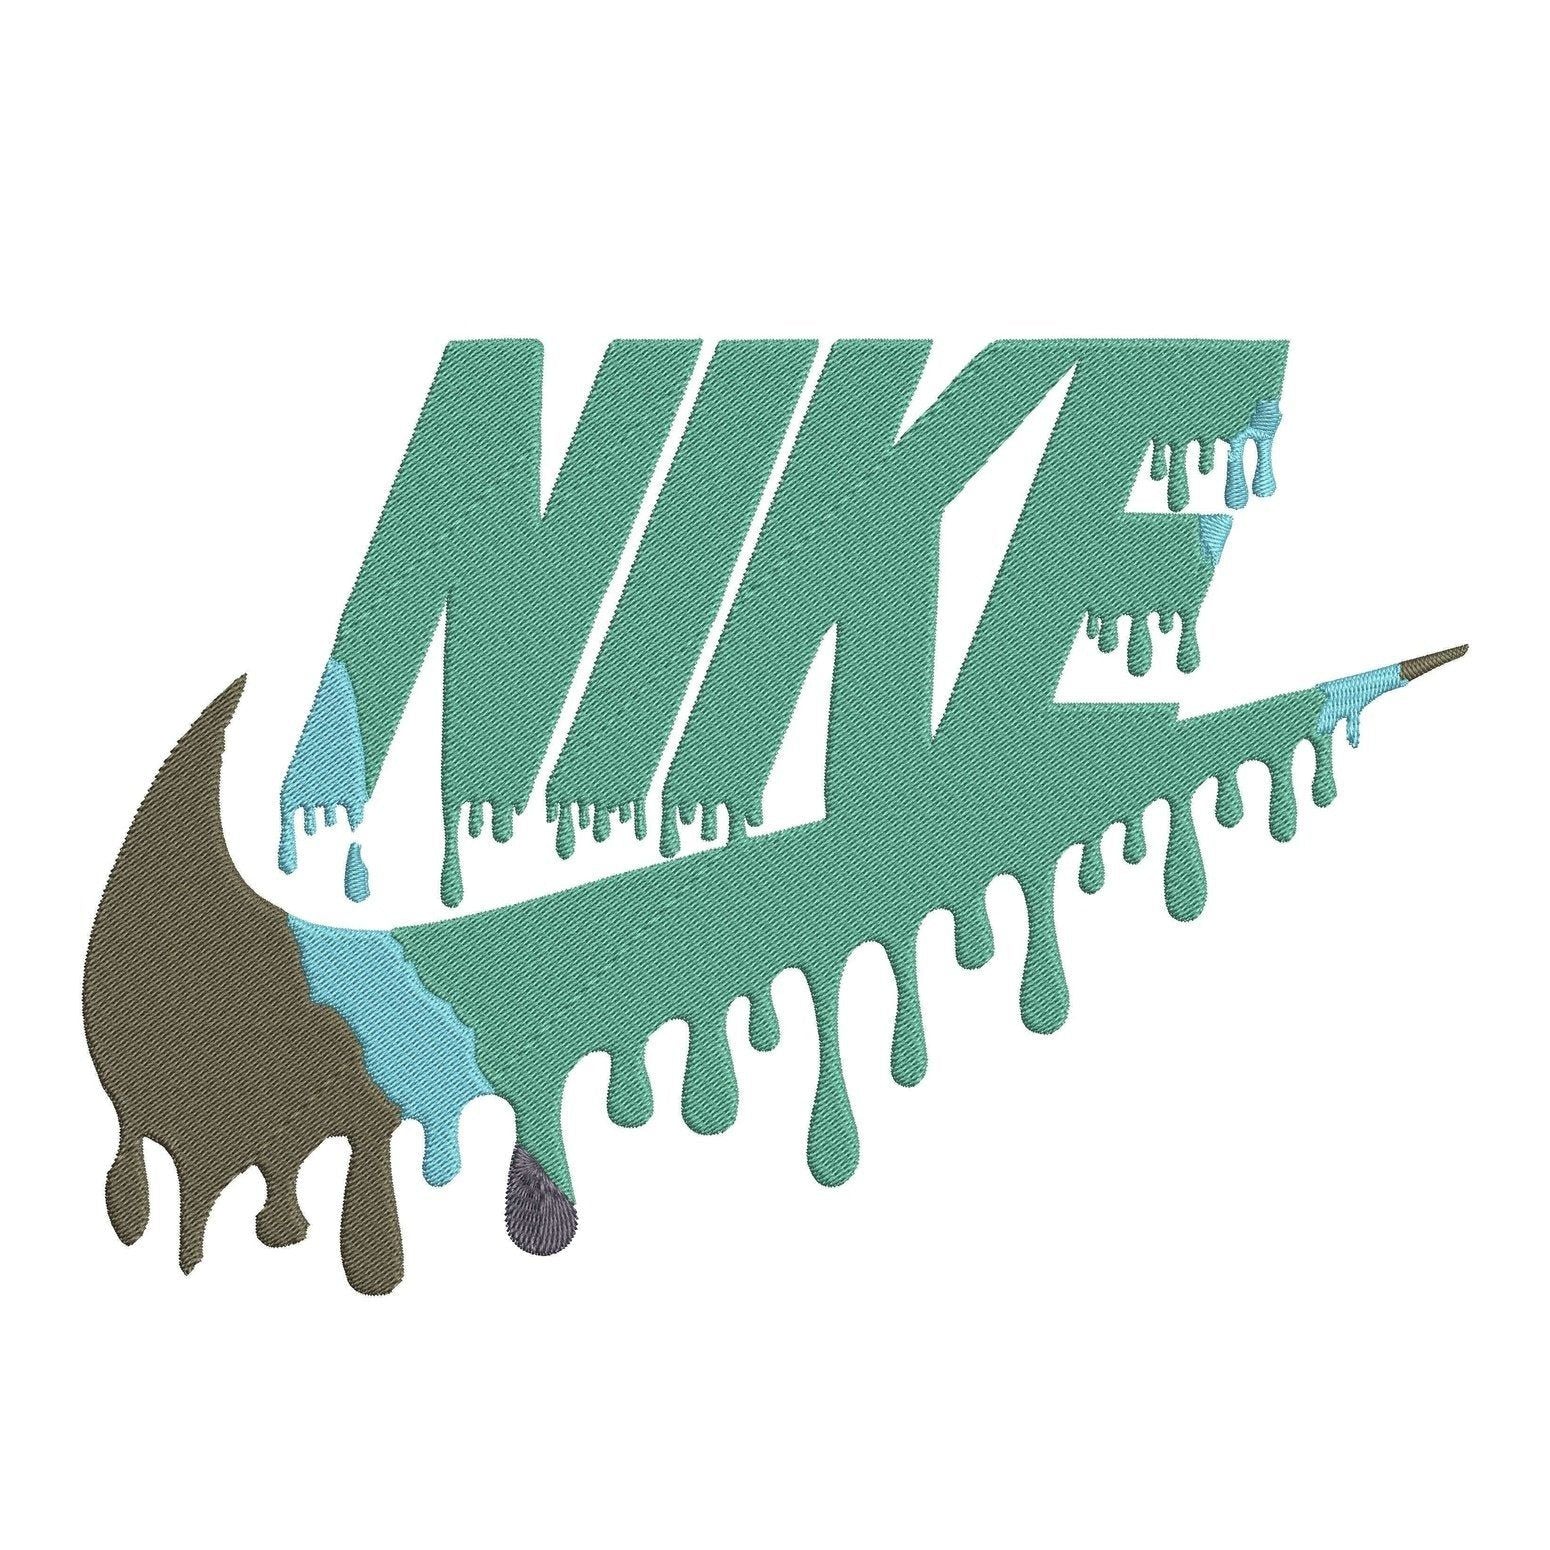 Nike Melted - Embroidery Design - FineryEmbroidery